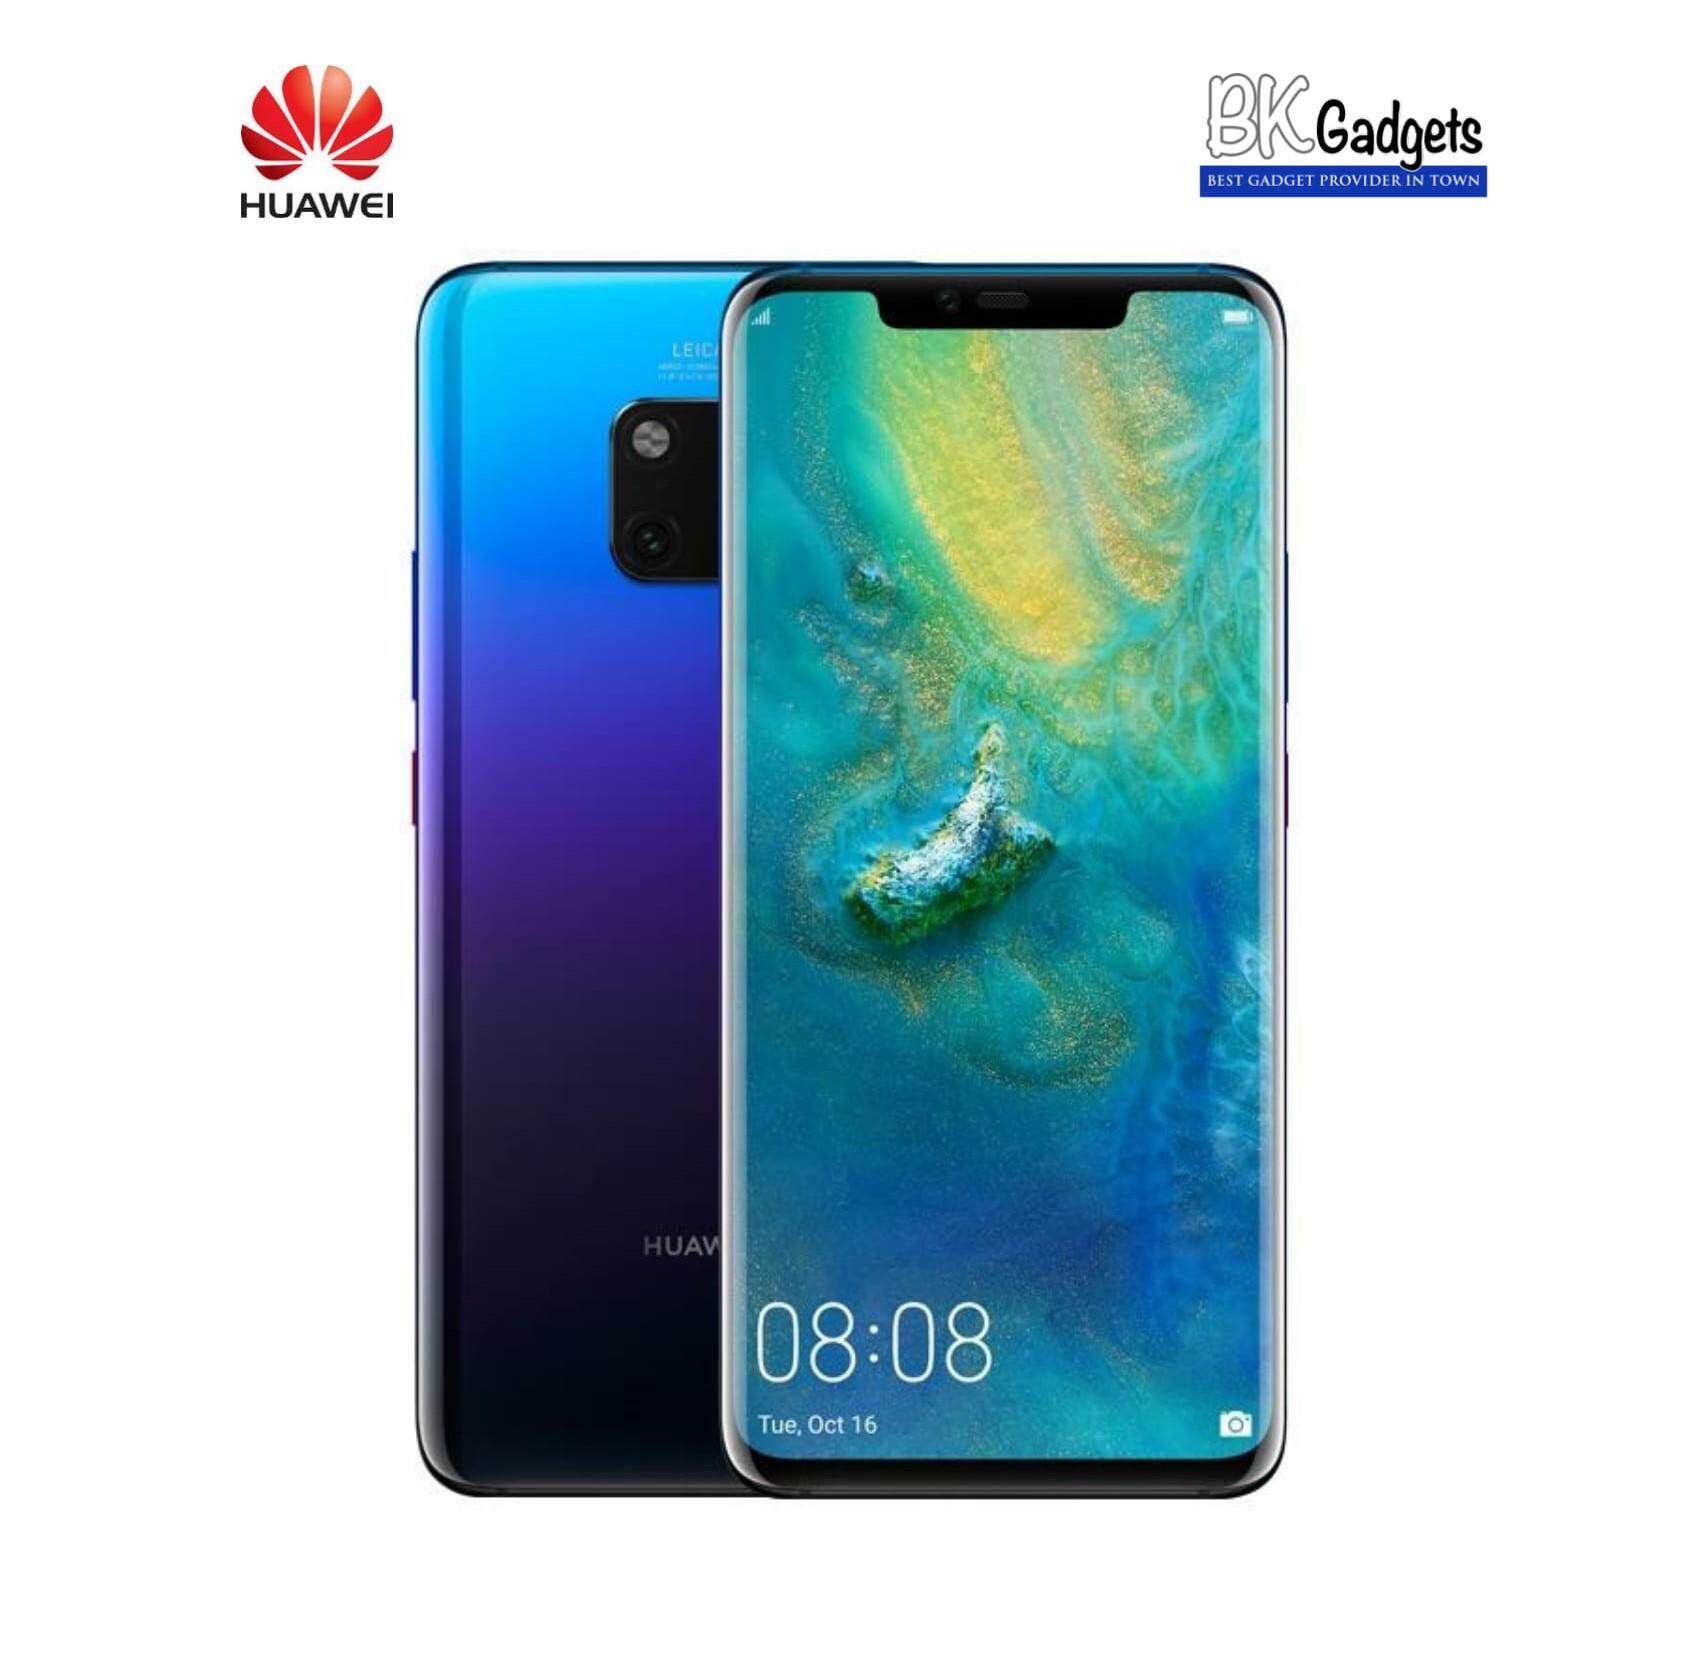 Huawei Mate 20 Pro Price in Malaysia & Specs | TechNave